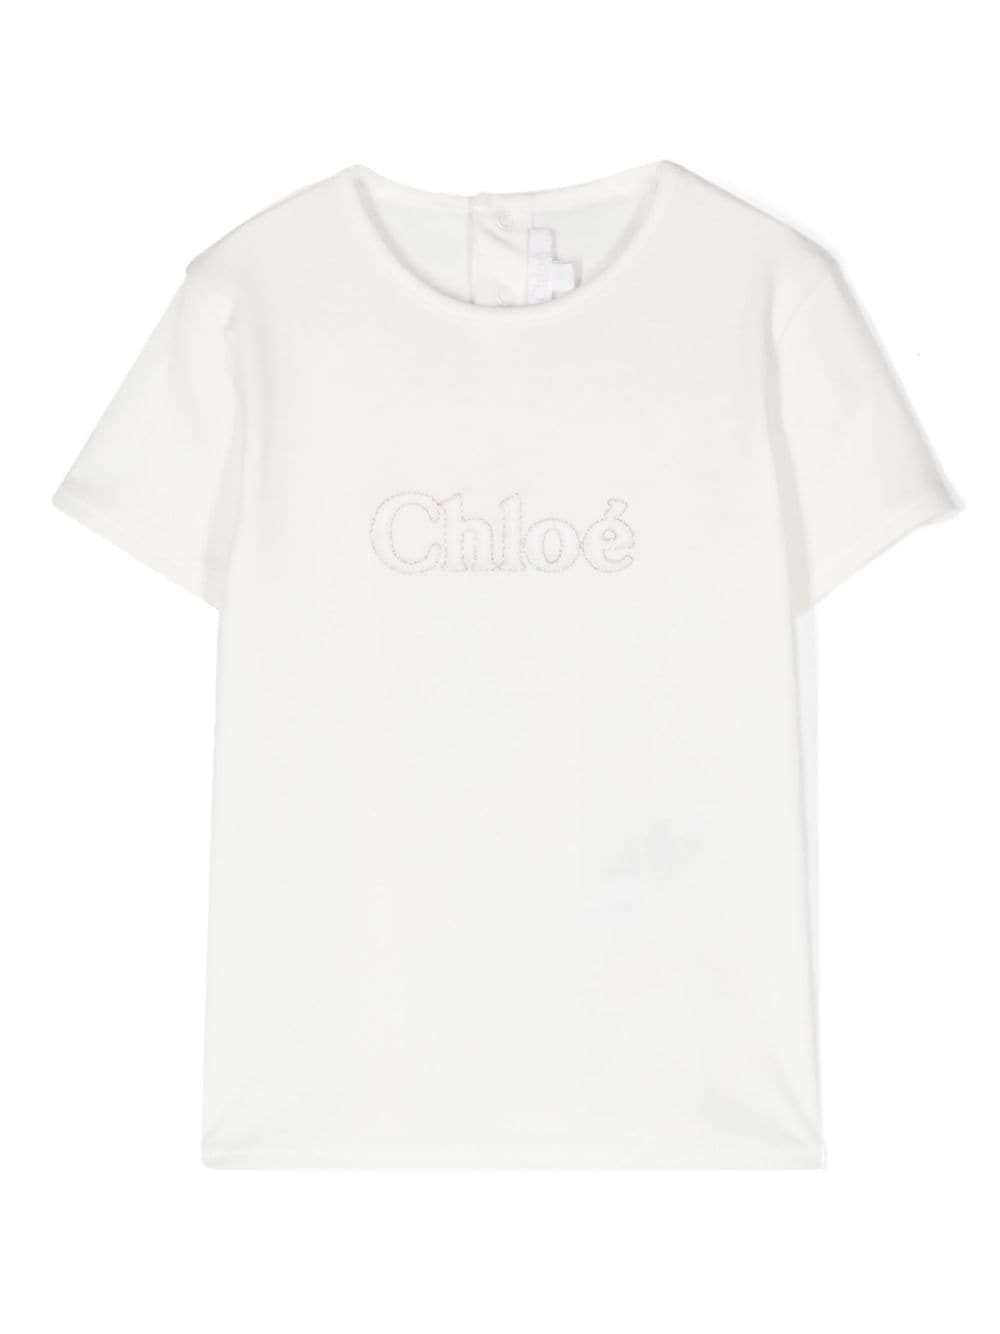 Image 1 of Chloé Kids logo-embroidered cotton T-shirt